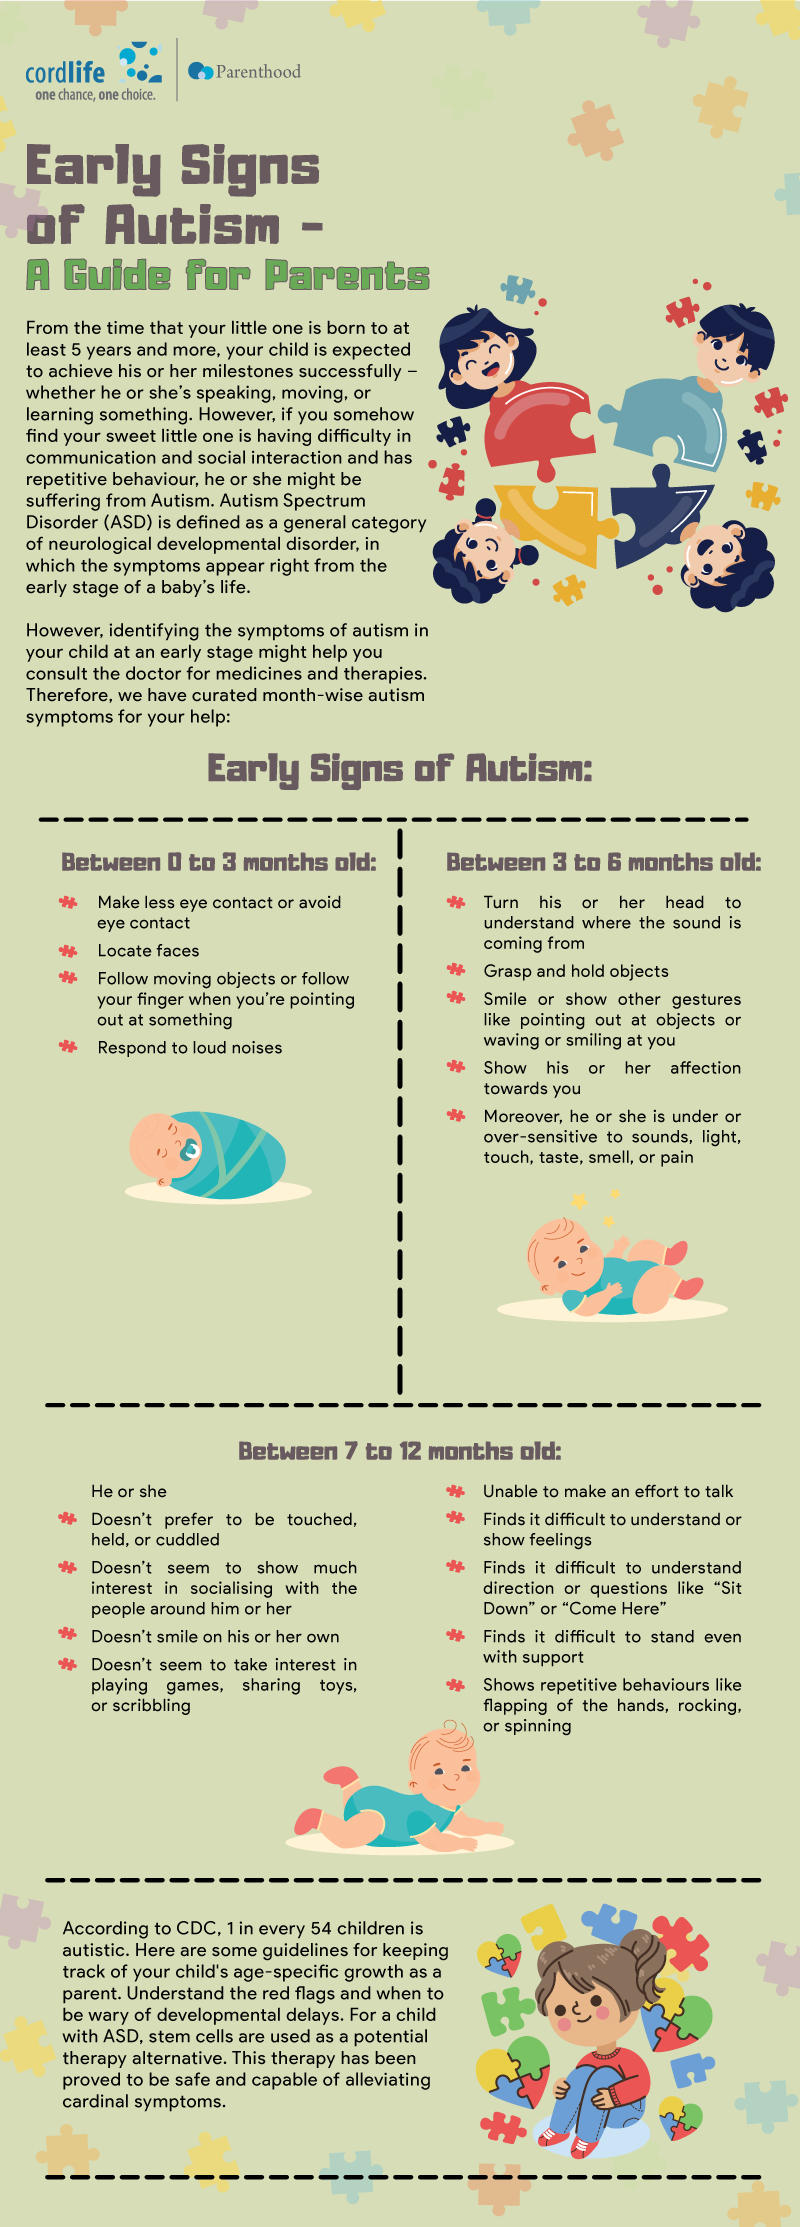 Early Signs of Autism guide for parents